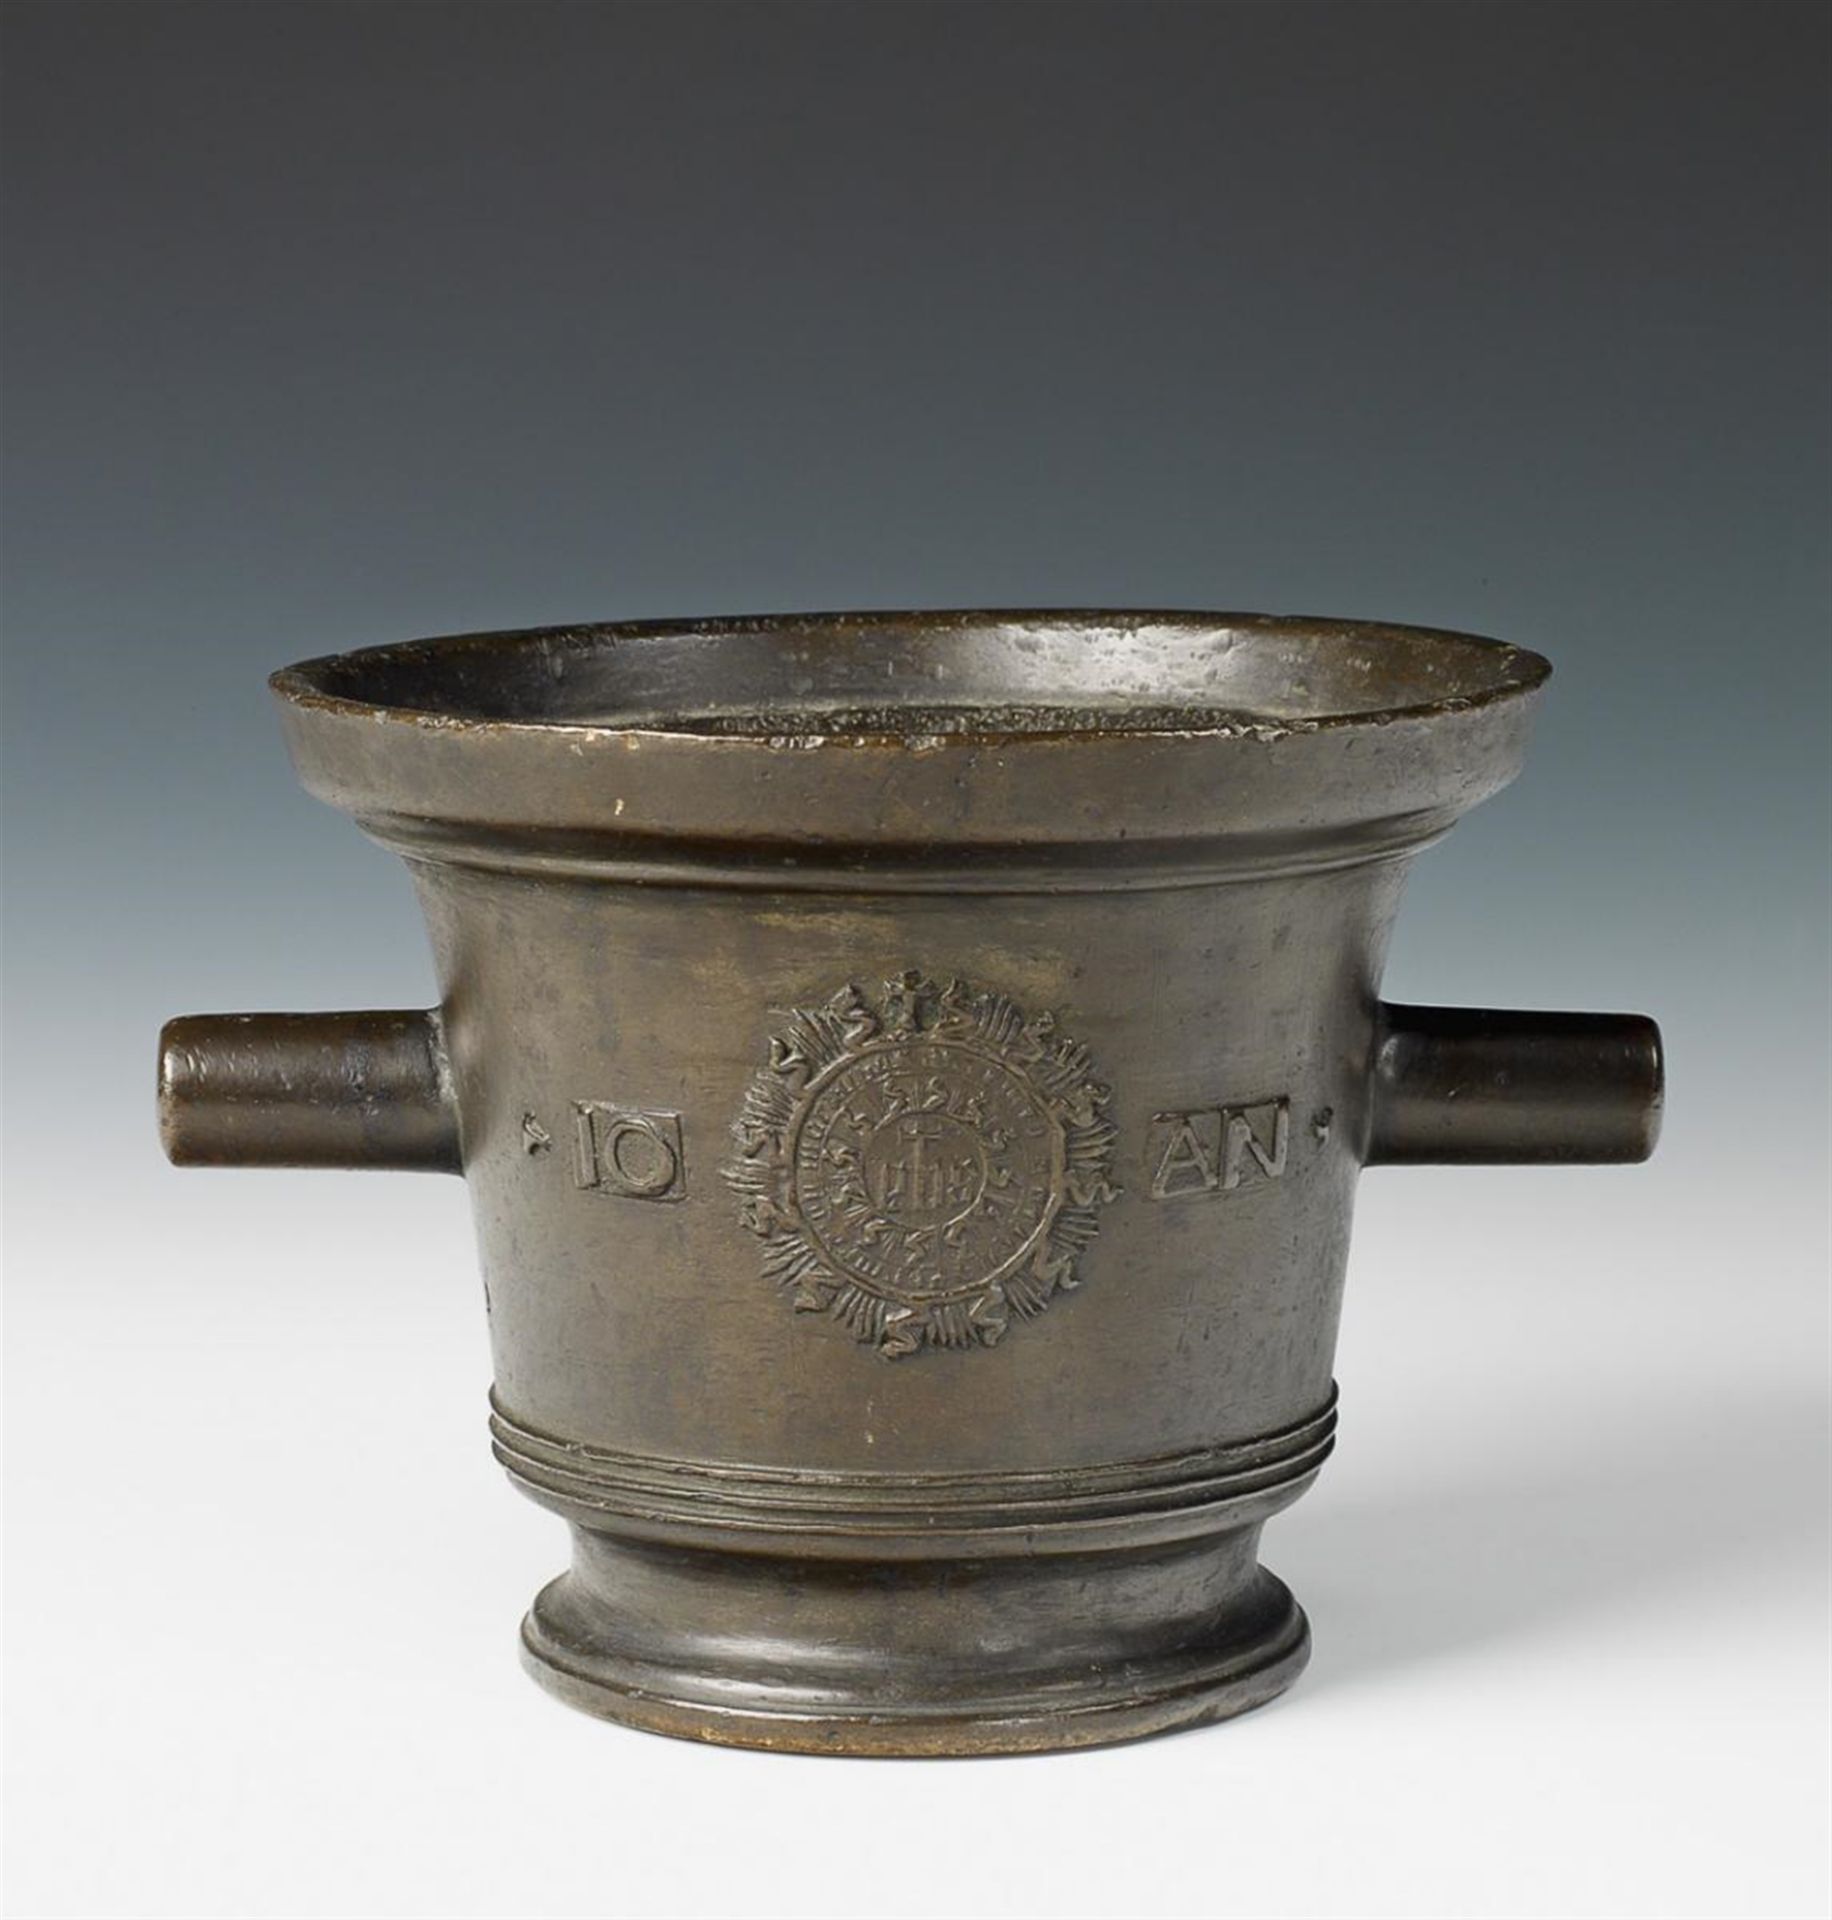 A cast bronze mortar decorated with a lion and Christogram